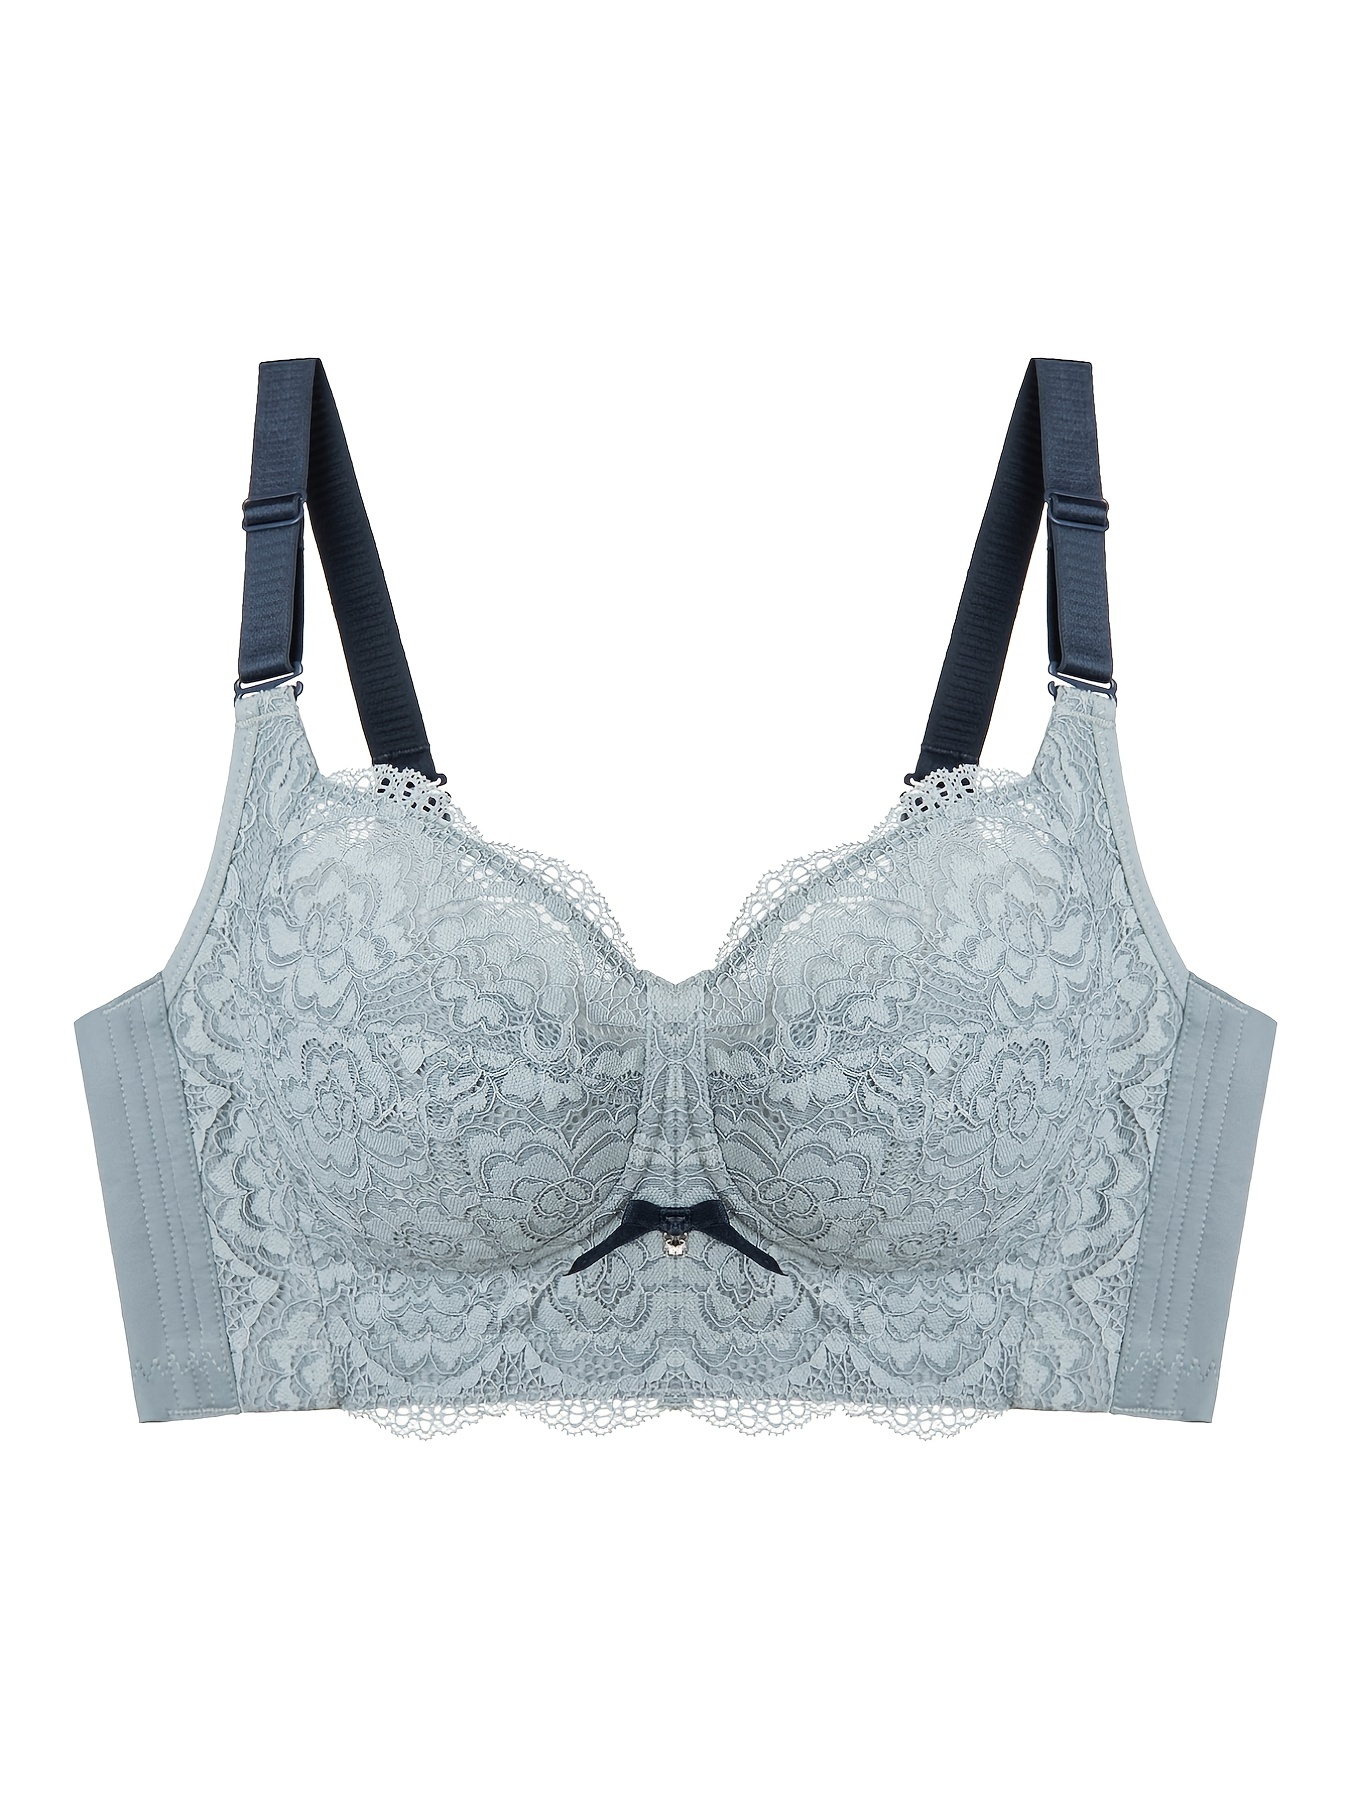 Soft Cotton Floral Lace Large Size Bras No Padded, Breathable, Push Up,  Full Cup Womens Sleep Lingerie C F, D BH From Char21, $20.43